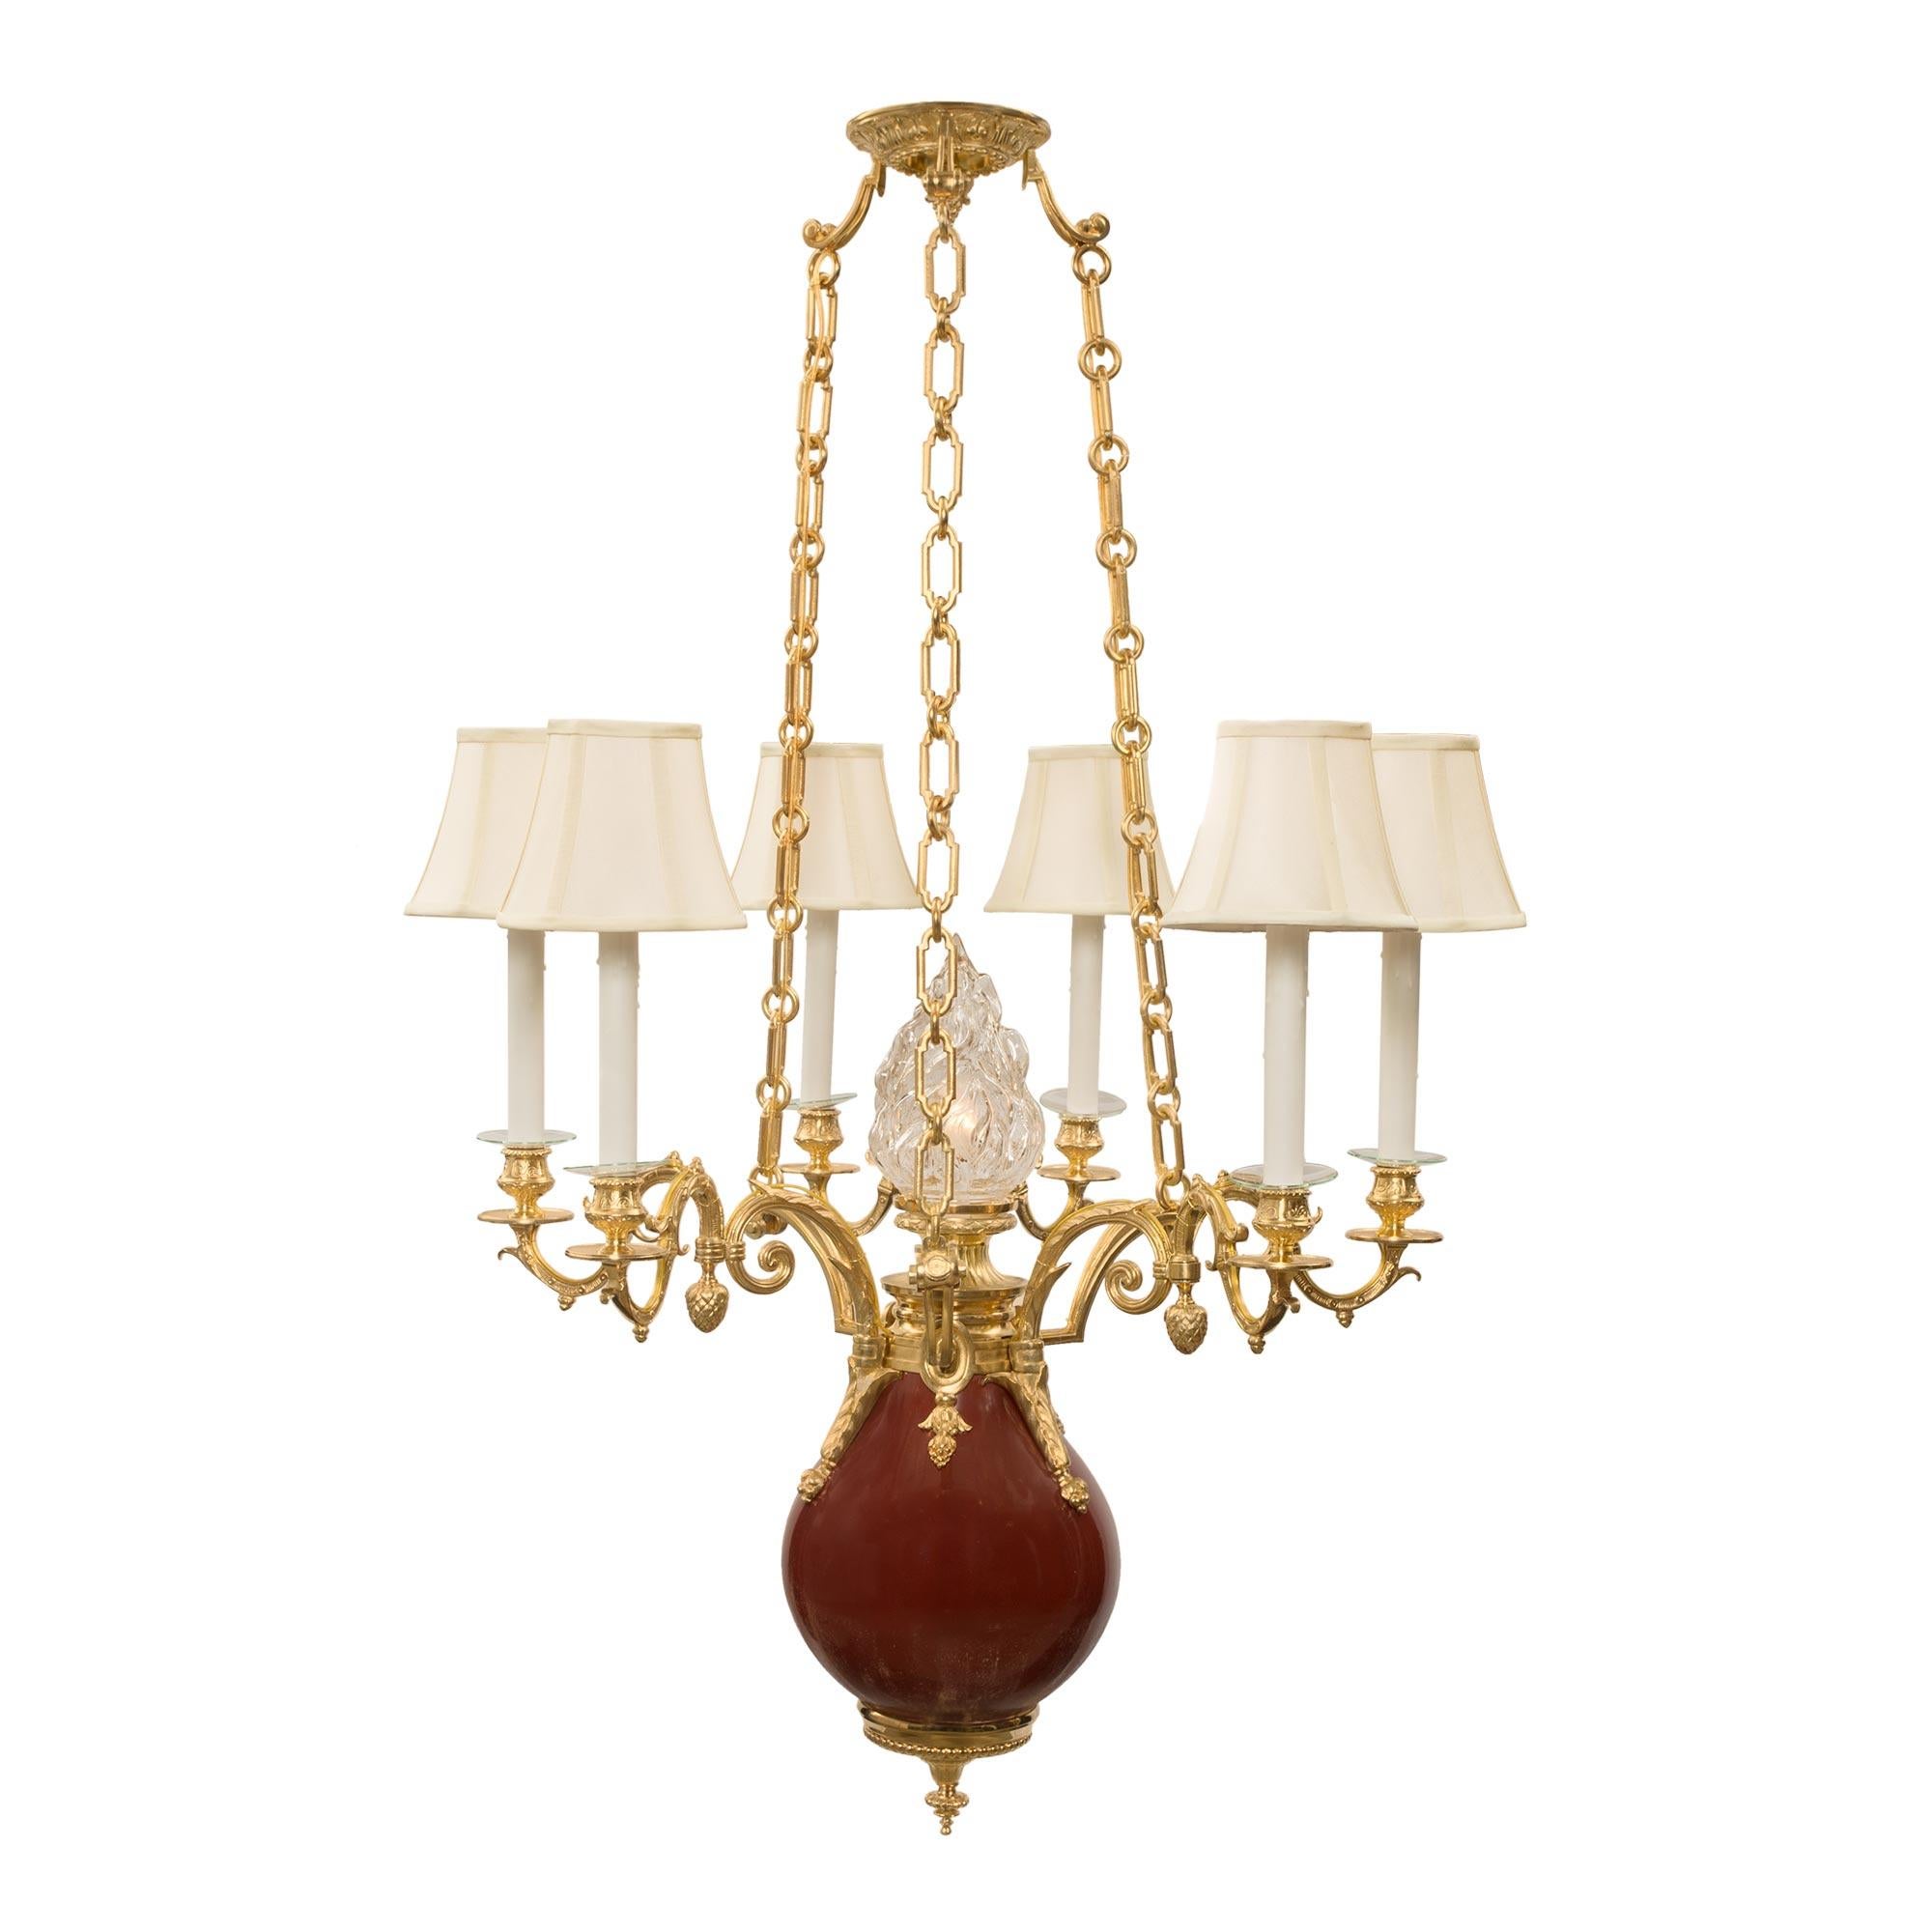 French 19th Century Louis XVI Style Porcelain and Ormolu Chandelier For Sale